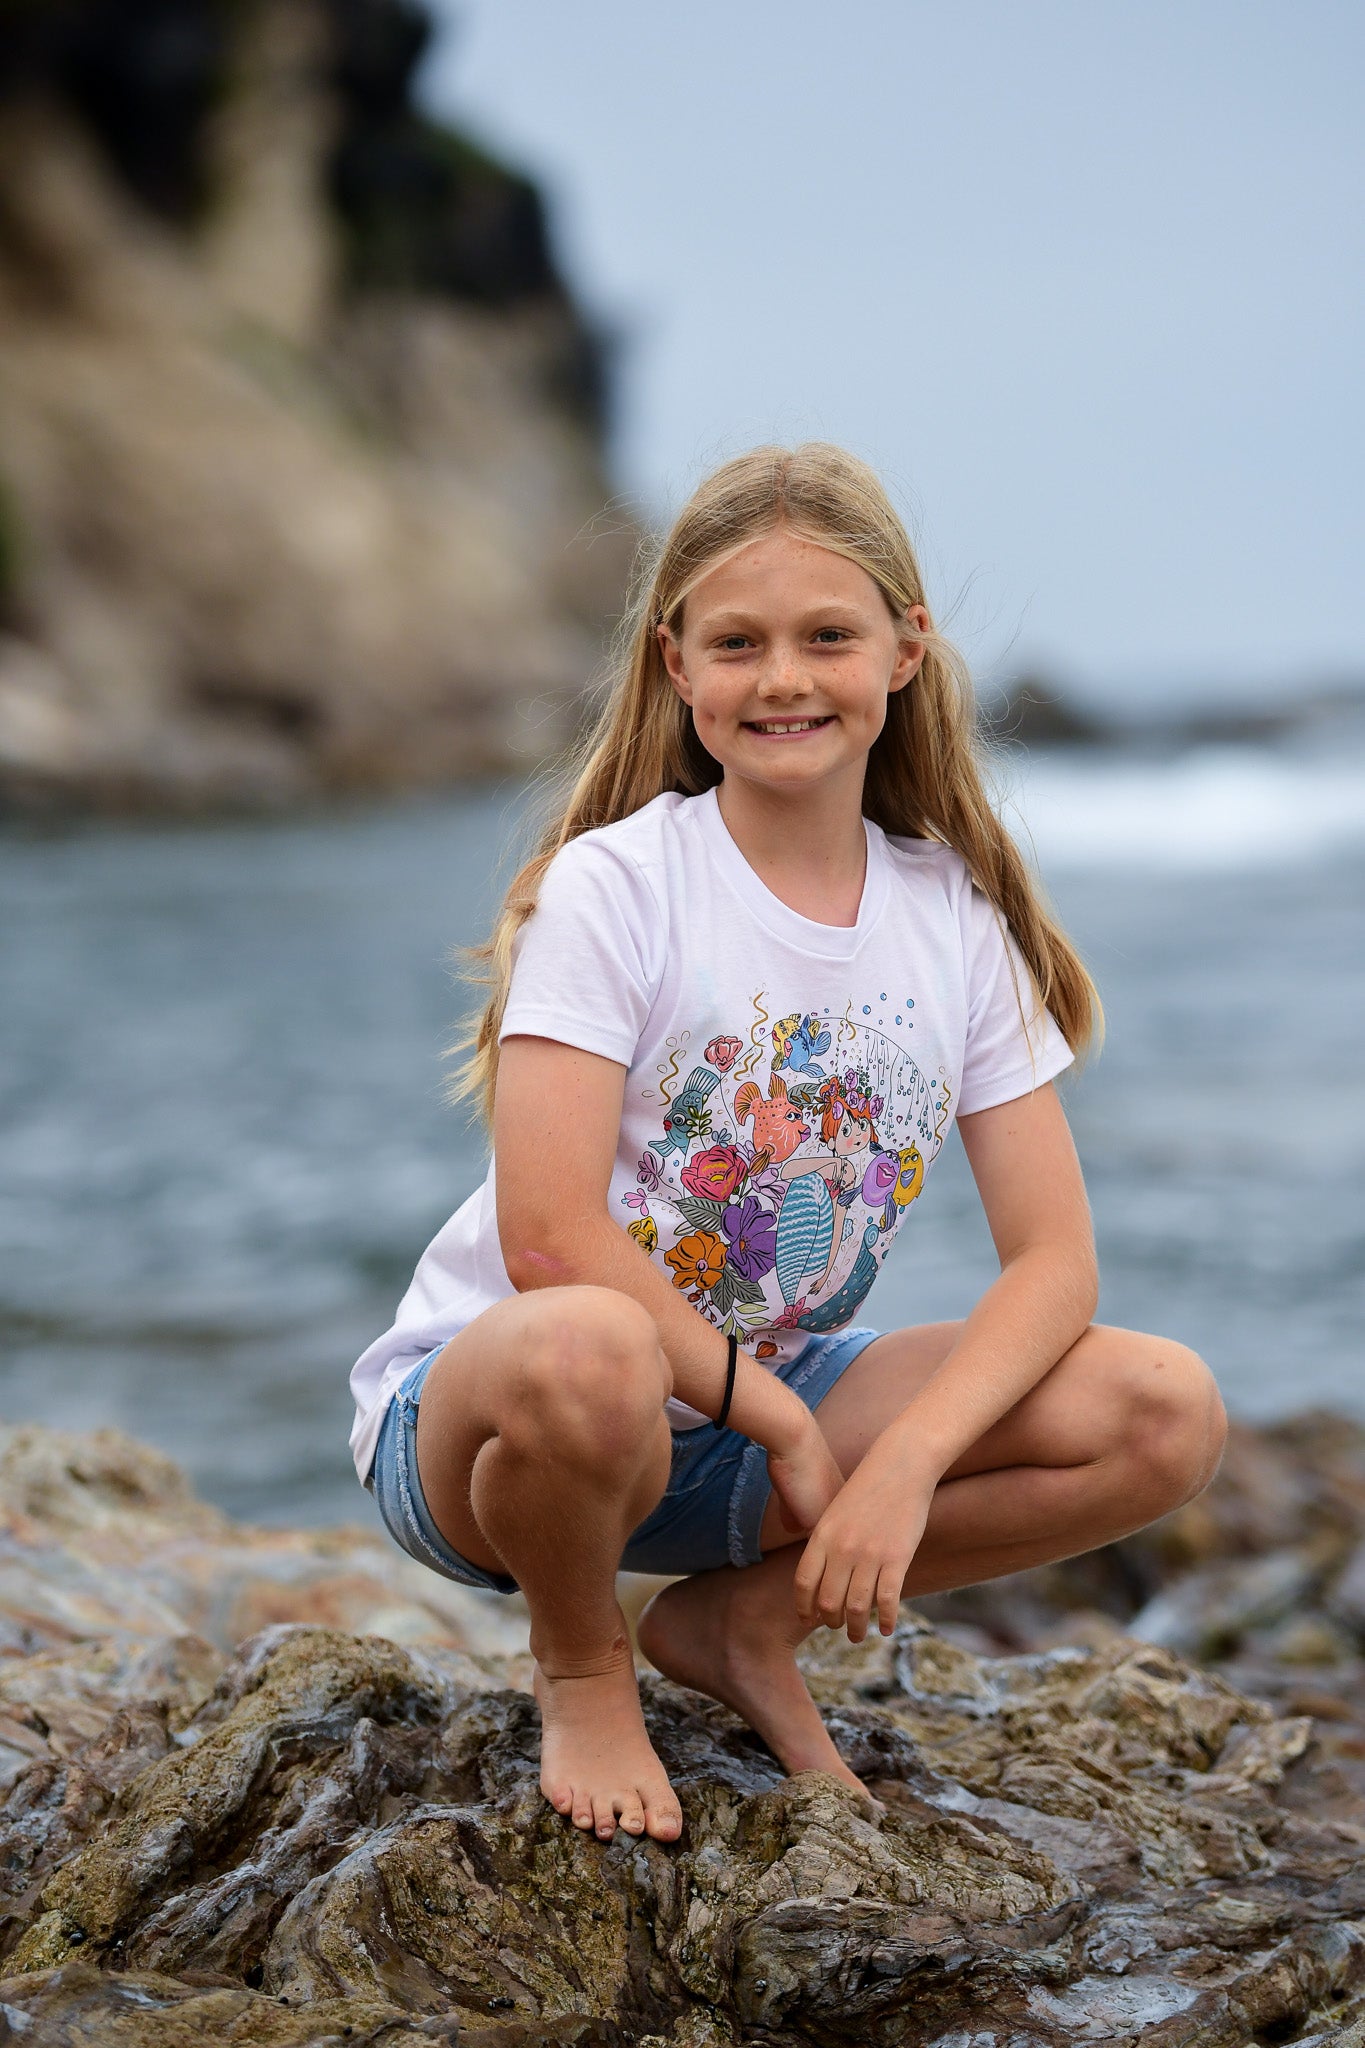 Load image into Gallery viewer, Floral mermaid graphic tee made by an artist for girls who enjoy the beach. NSG graphic tee collection
